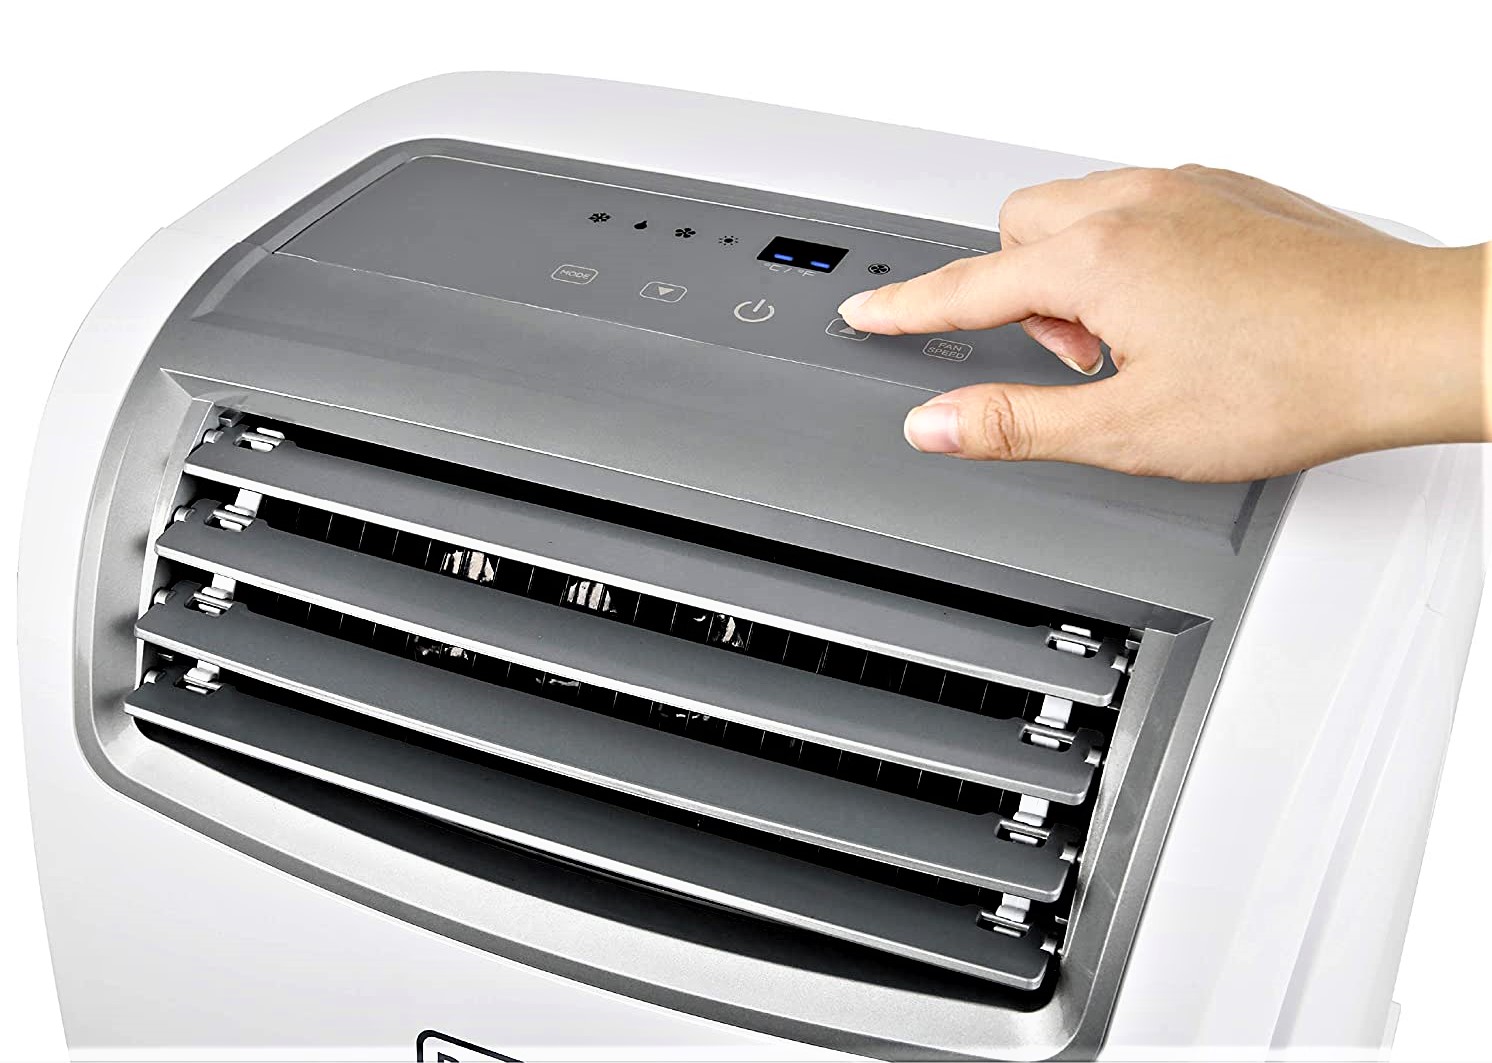 81IErlznkAL. AC SL1500 10 BEST AIR CONDITIONERS FOR YOUR GARAGE 2021 REVIEW